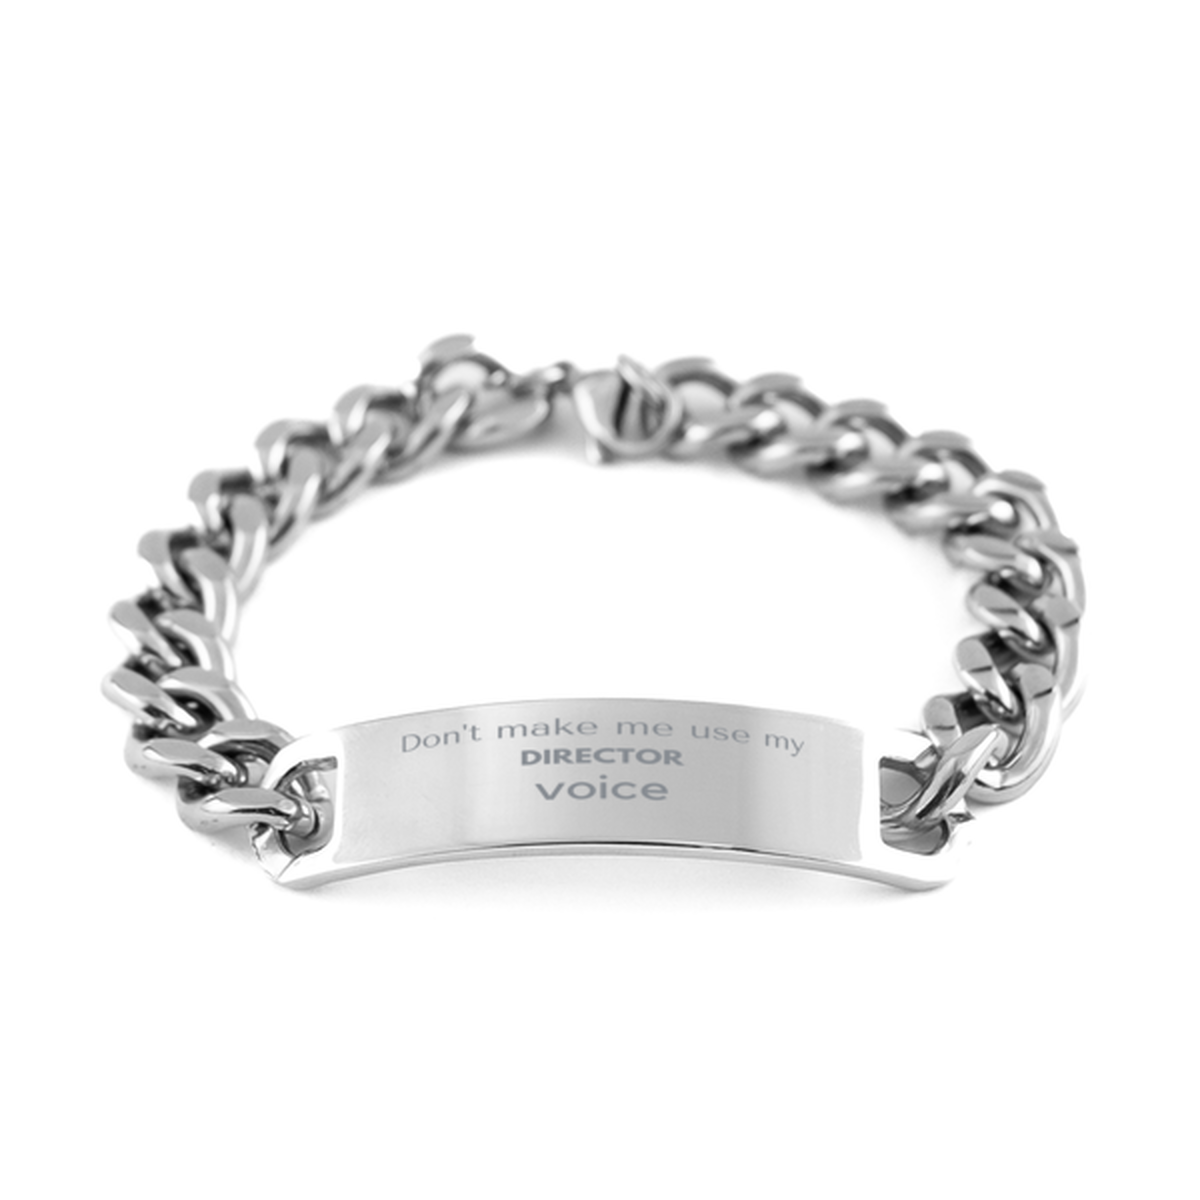 Don't make me use my Director voice, Sarcasm Director Gifts, Christmas Director Cuban Chain Stainless Steel Bracelet Birthday Unique Gifts For Director Coworkers, Men, Women, Colleague, Friends